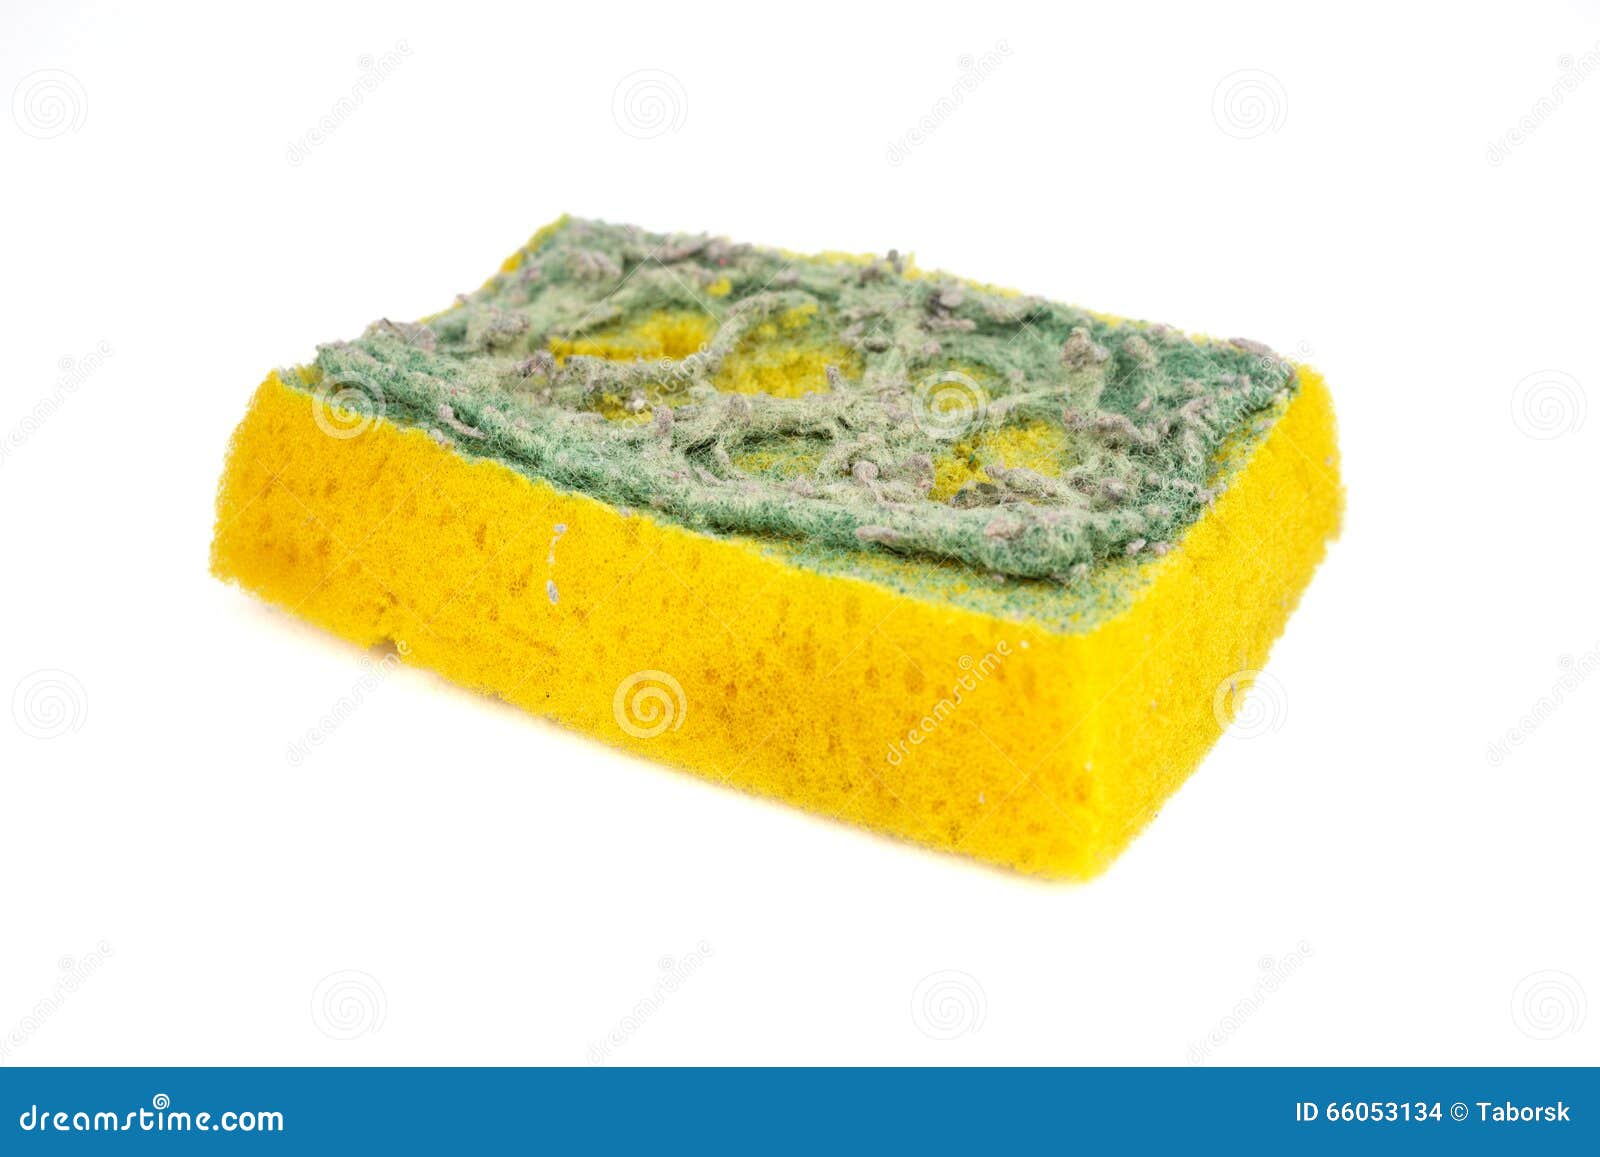 Used sponge for cleaning stock photo. Image of sanitary ...